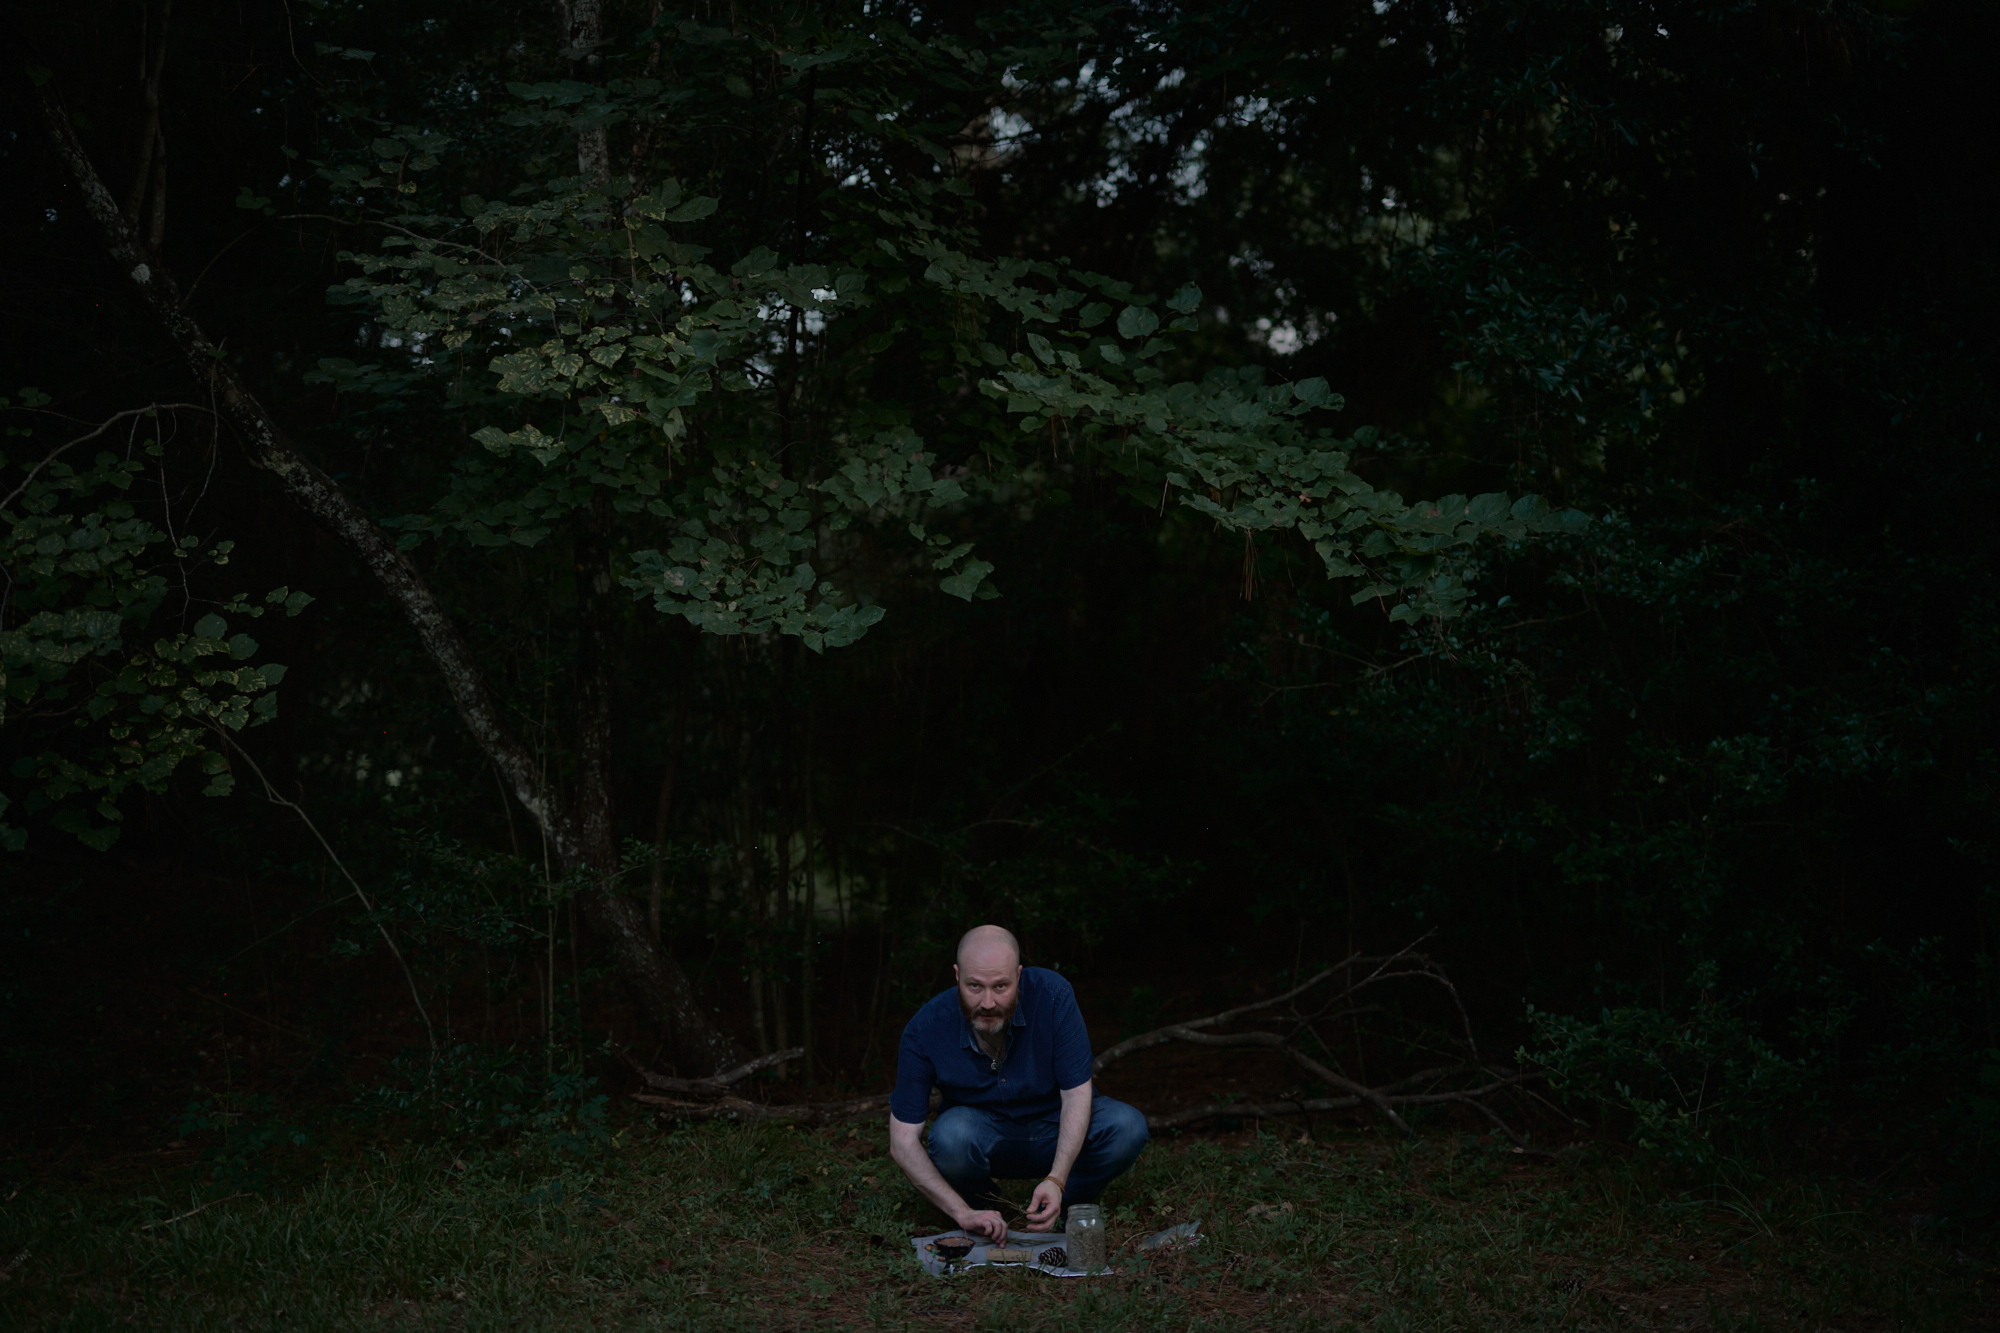 Photo of a man kneeling in the forest with a cloth holding tools and plants on the ground in front of him